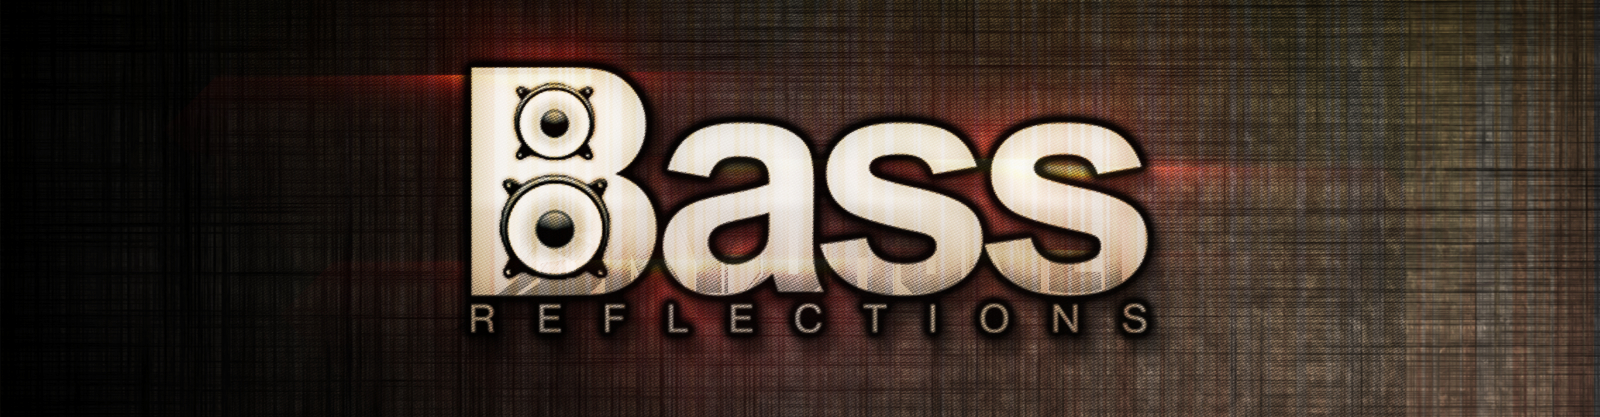 About Bass Reflections